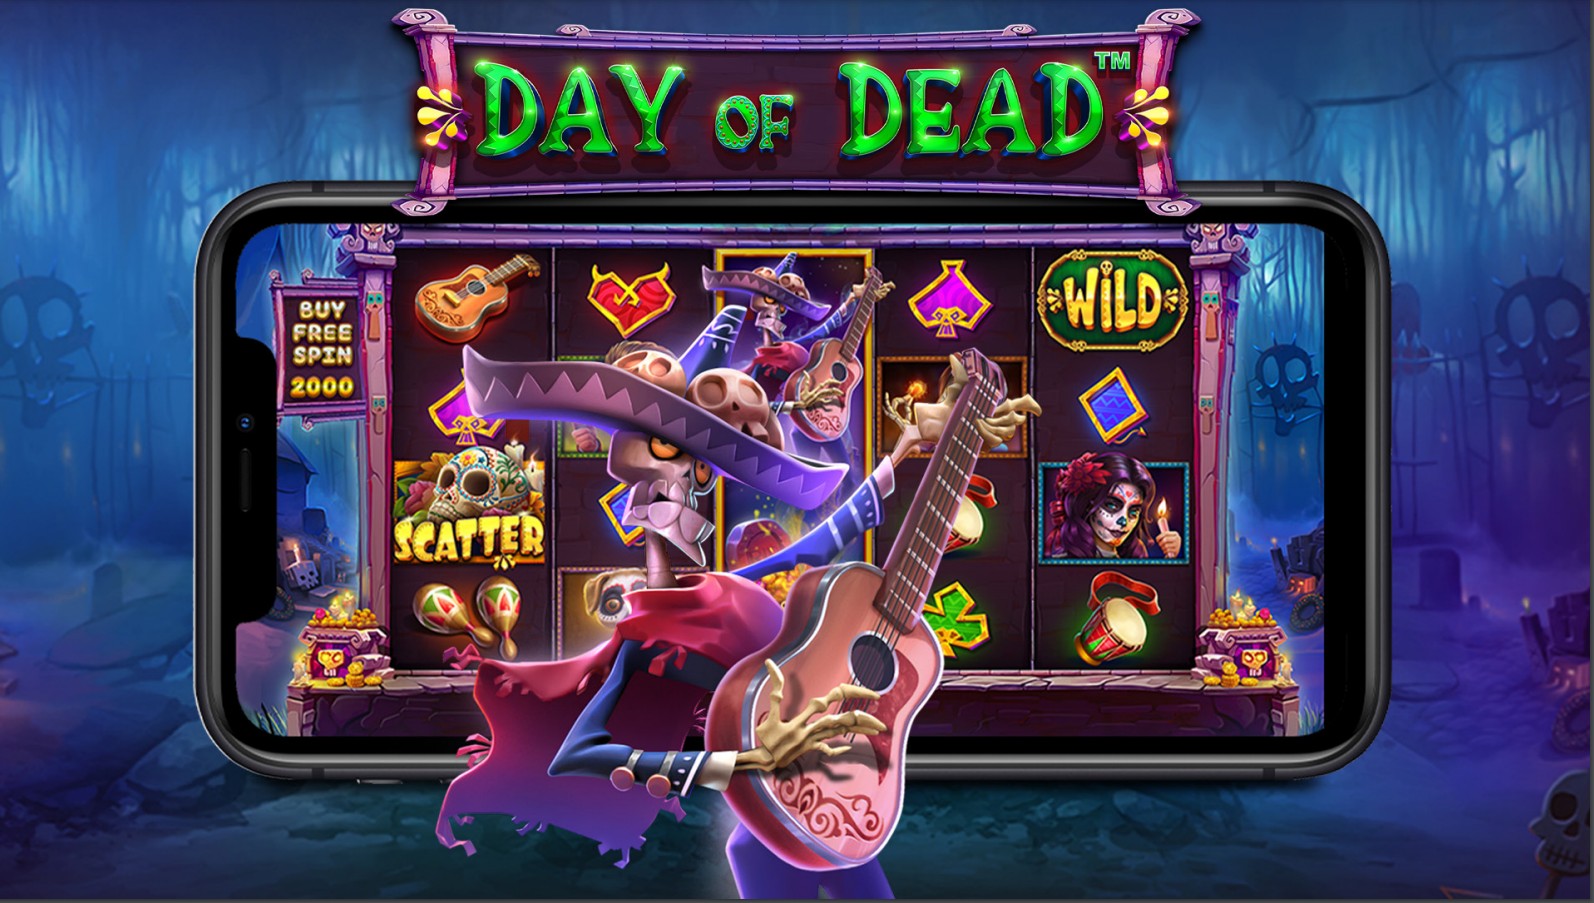 Day Of Dead